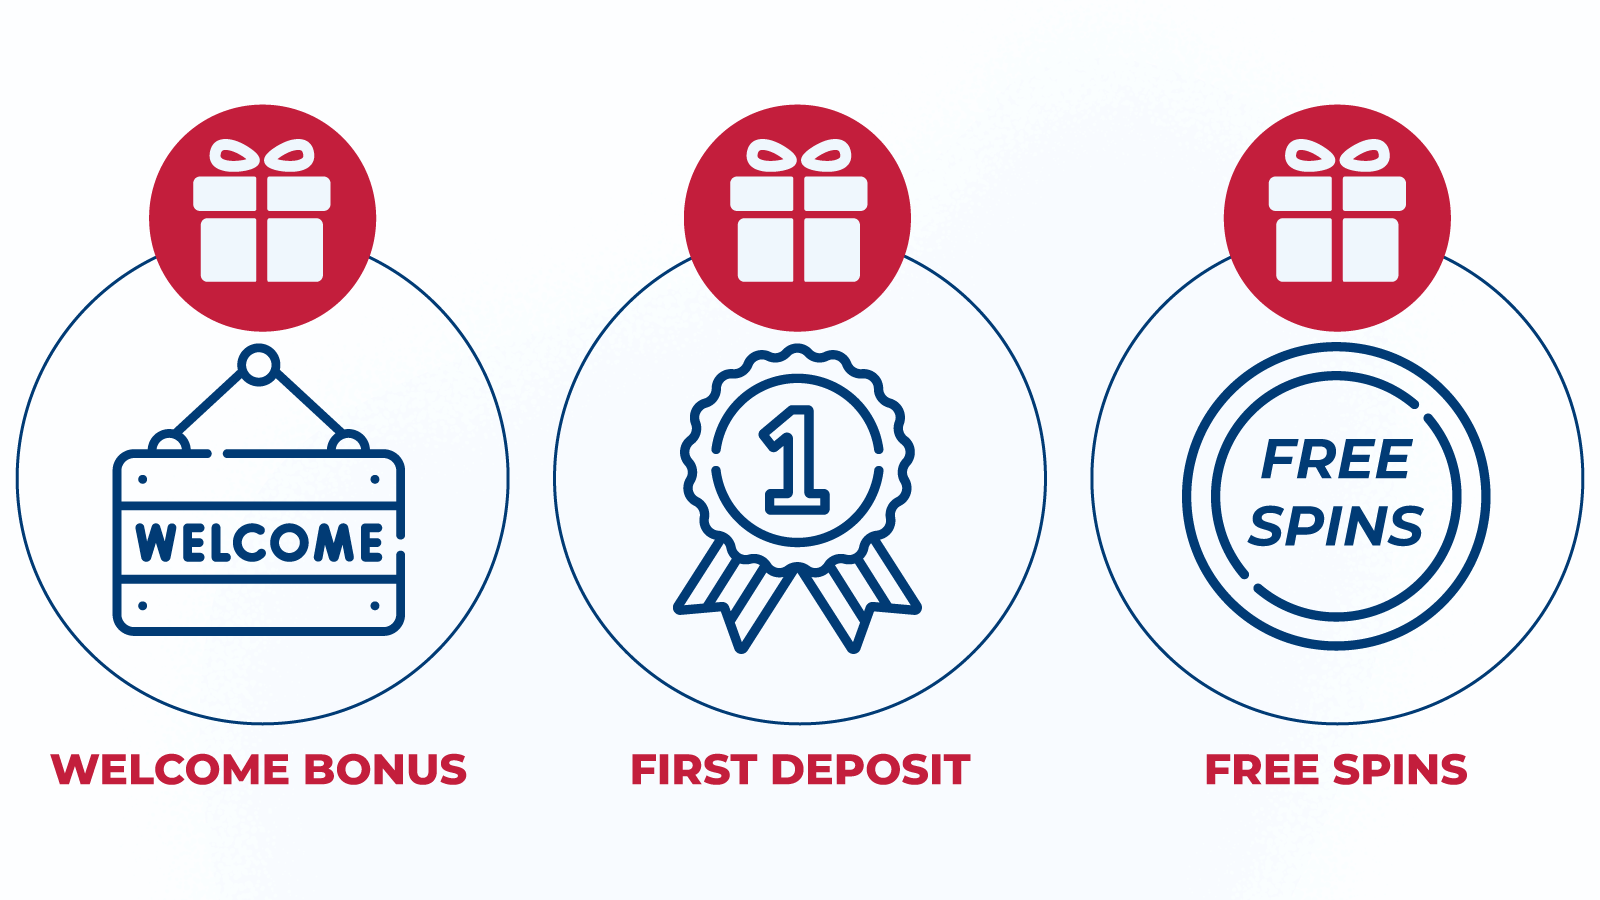 Types of 500 welcome bonuses